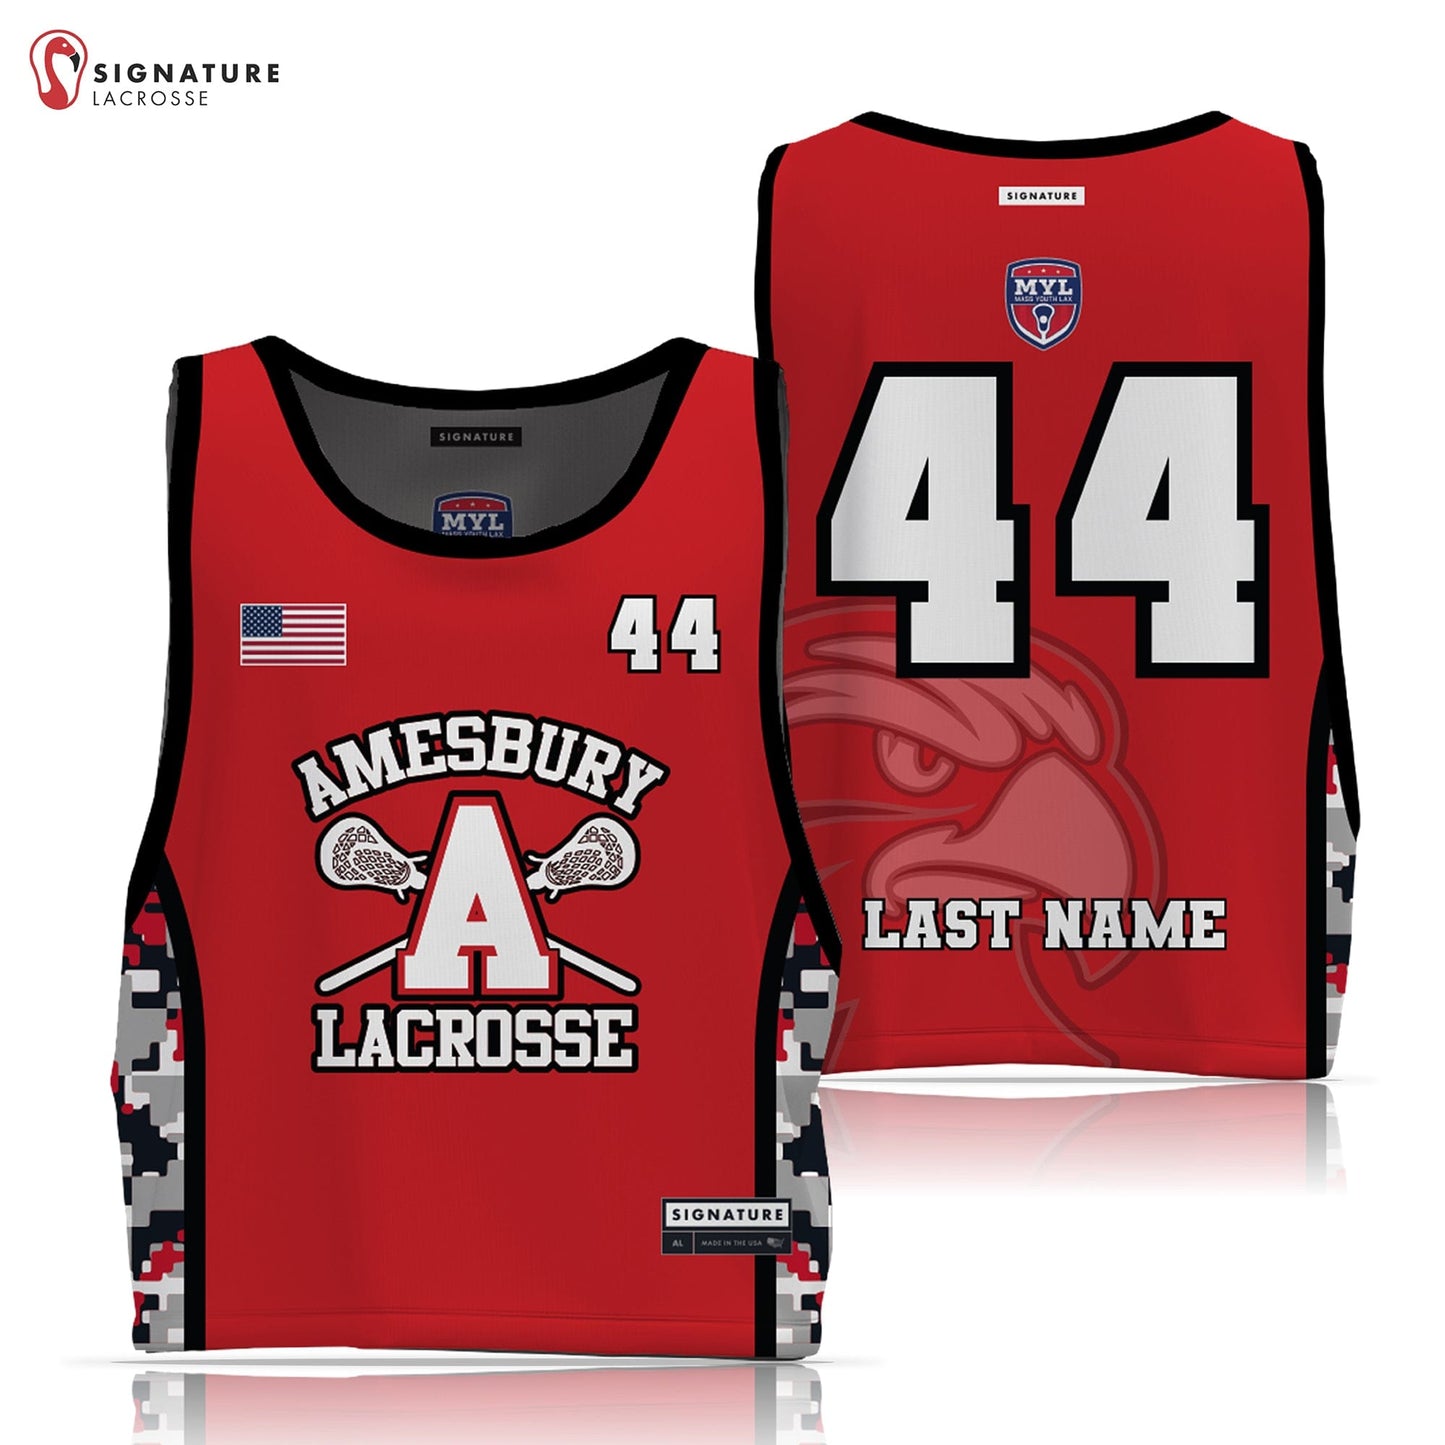 Amesbury Youth Lacrosse Men's Player Reversible Game Pinnie Signature Lacrosse